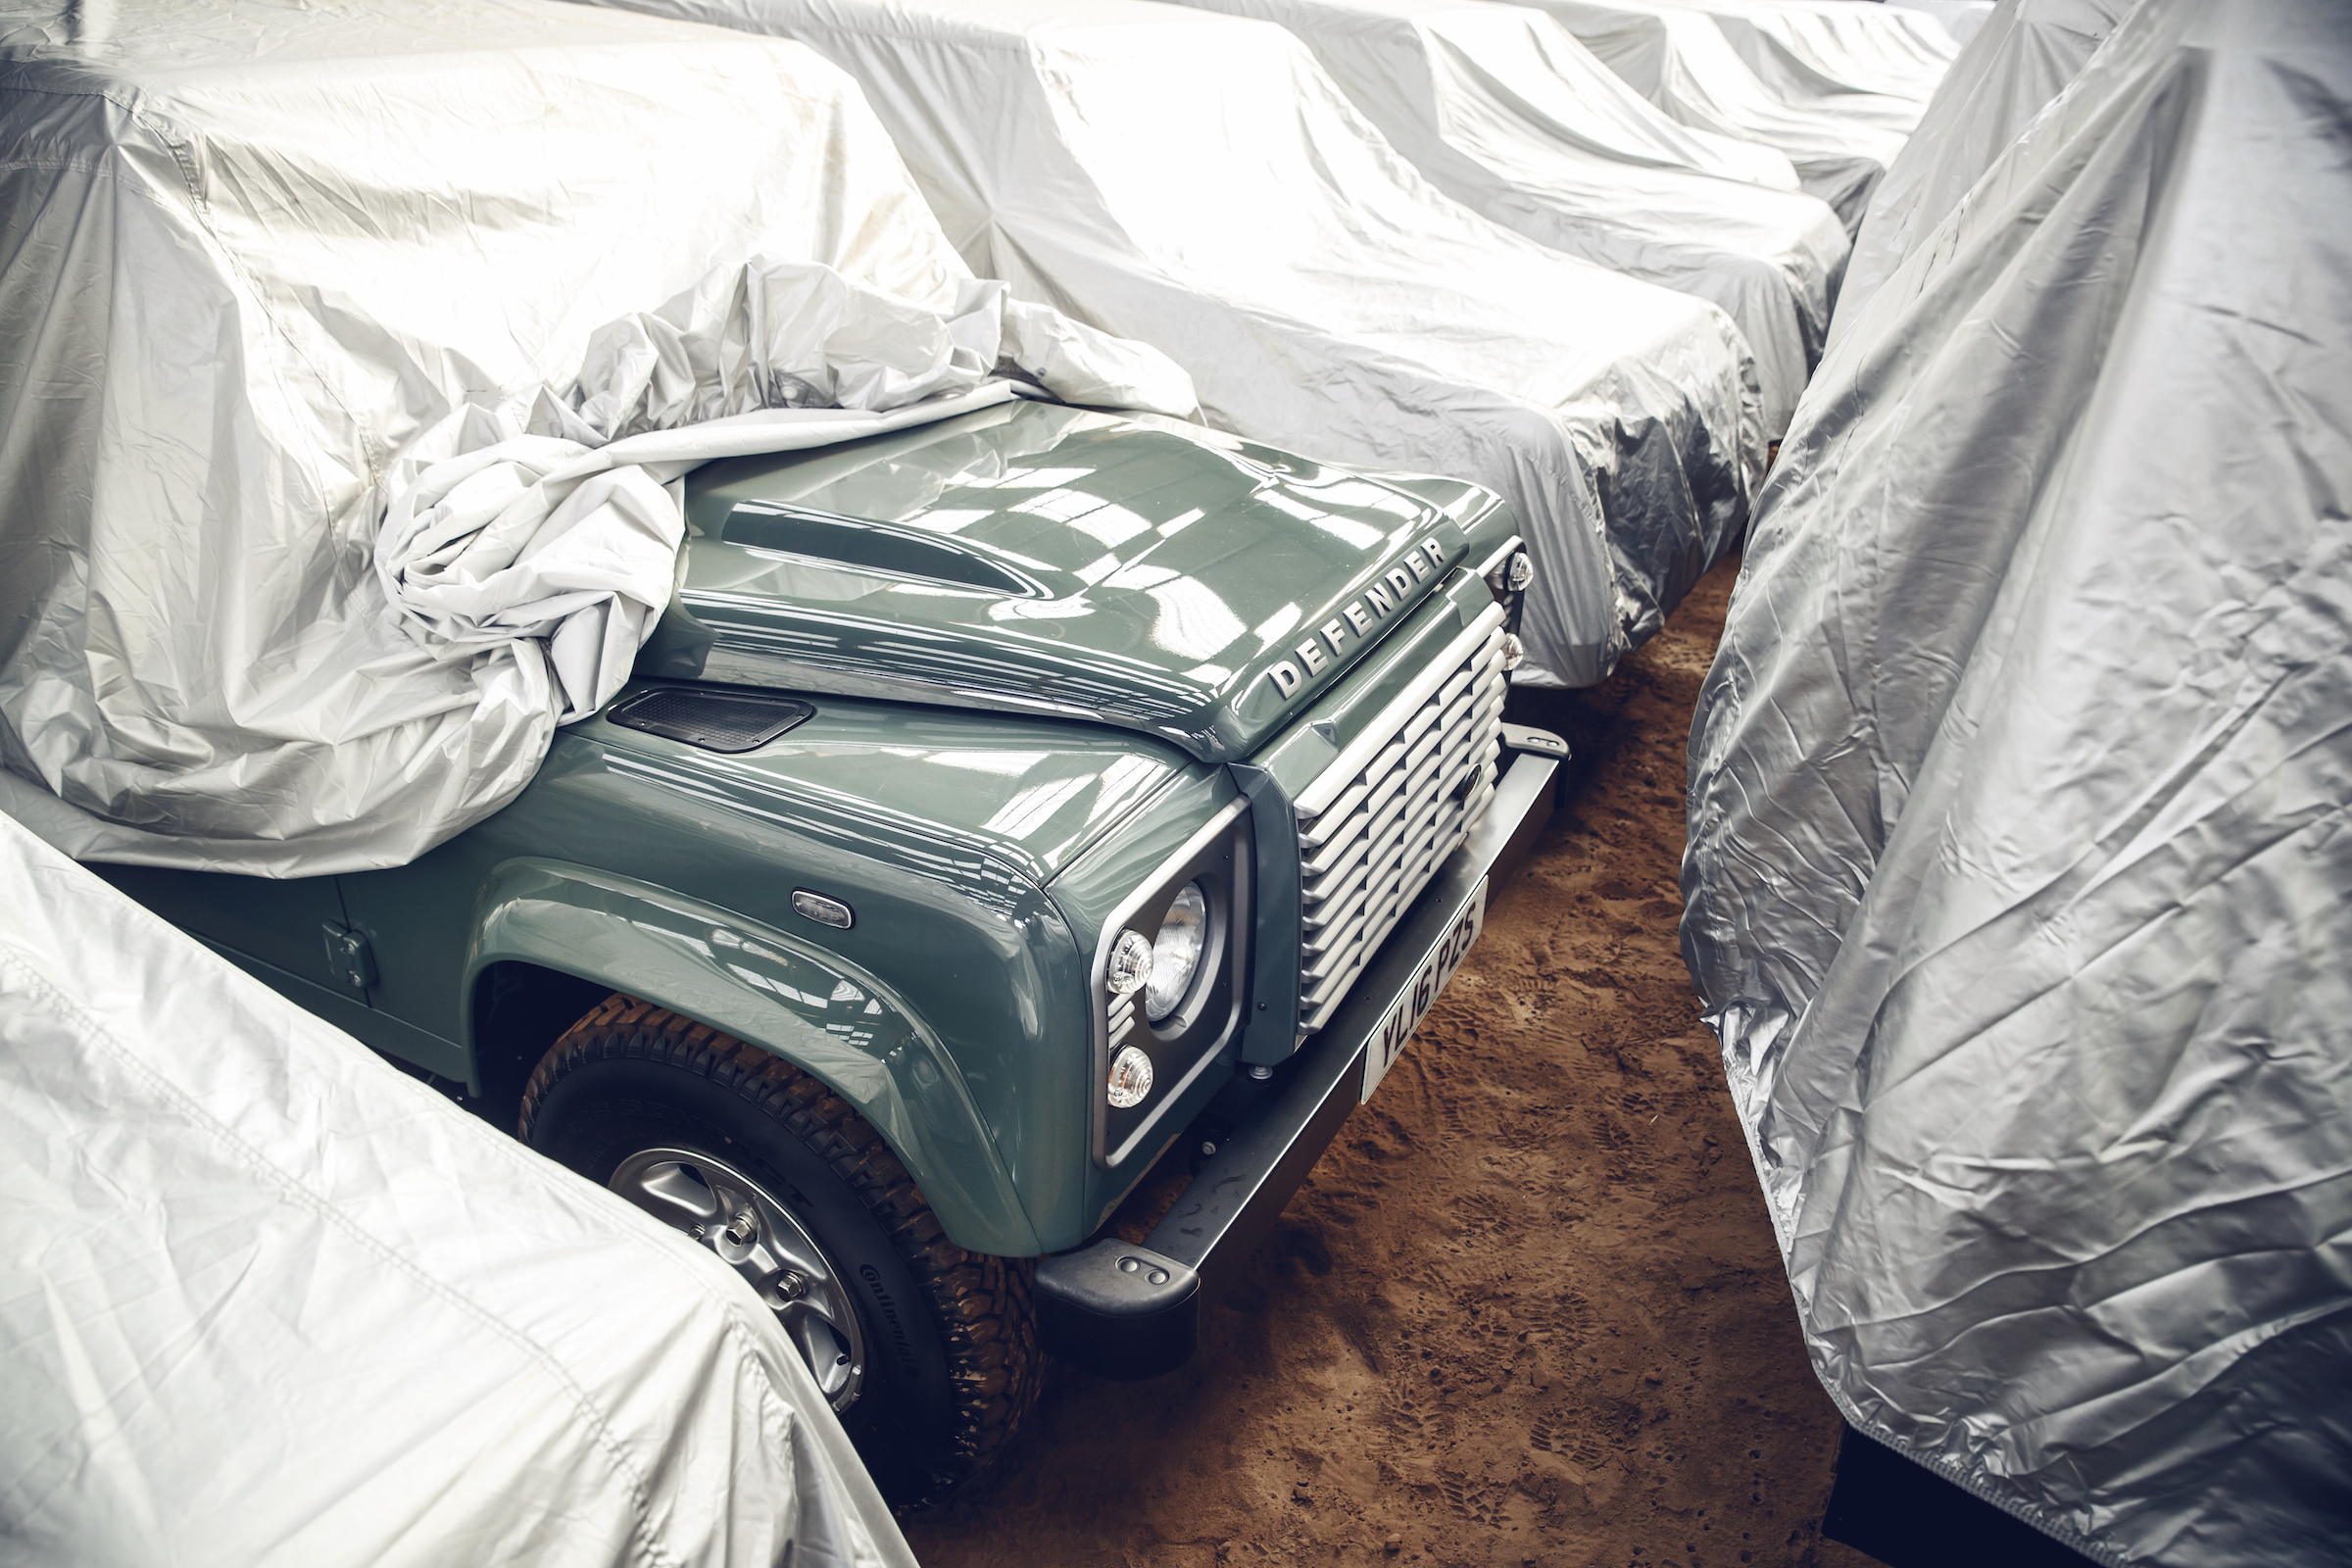 The last 16 new-old Land Rover Defenders are for sale